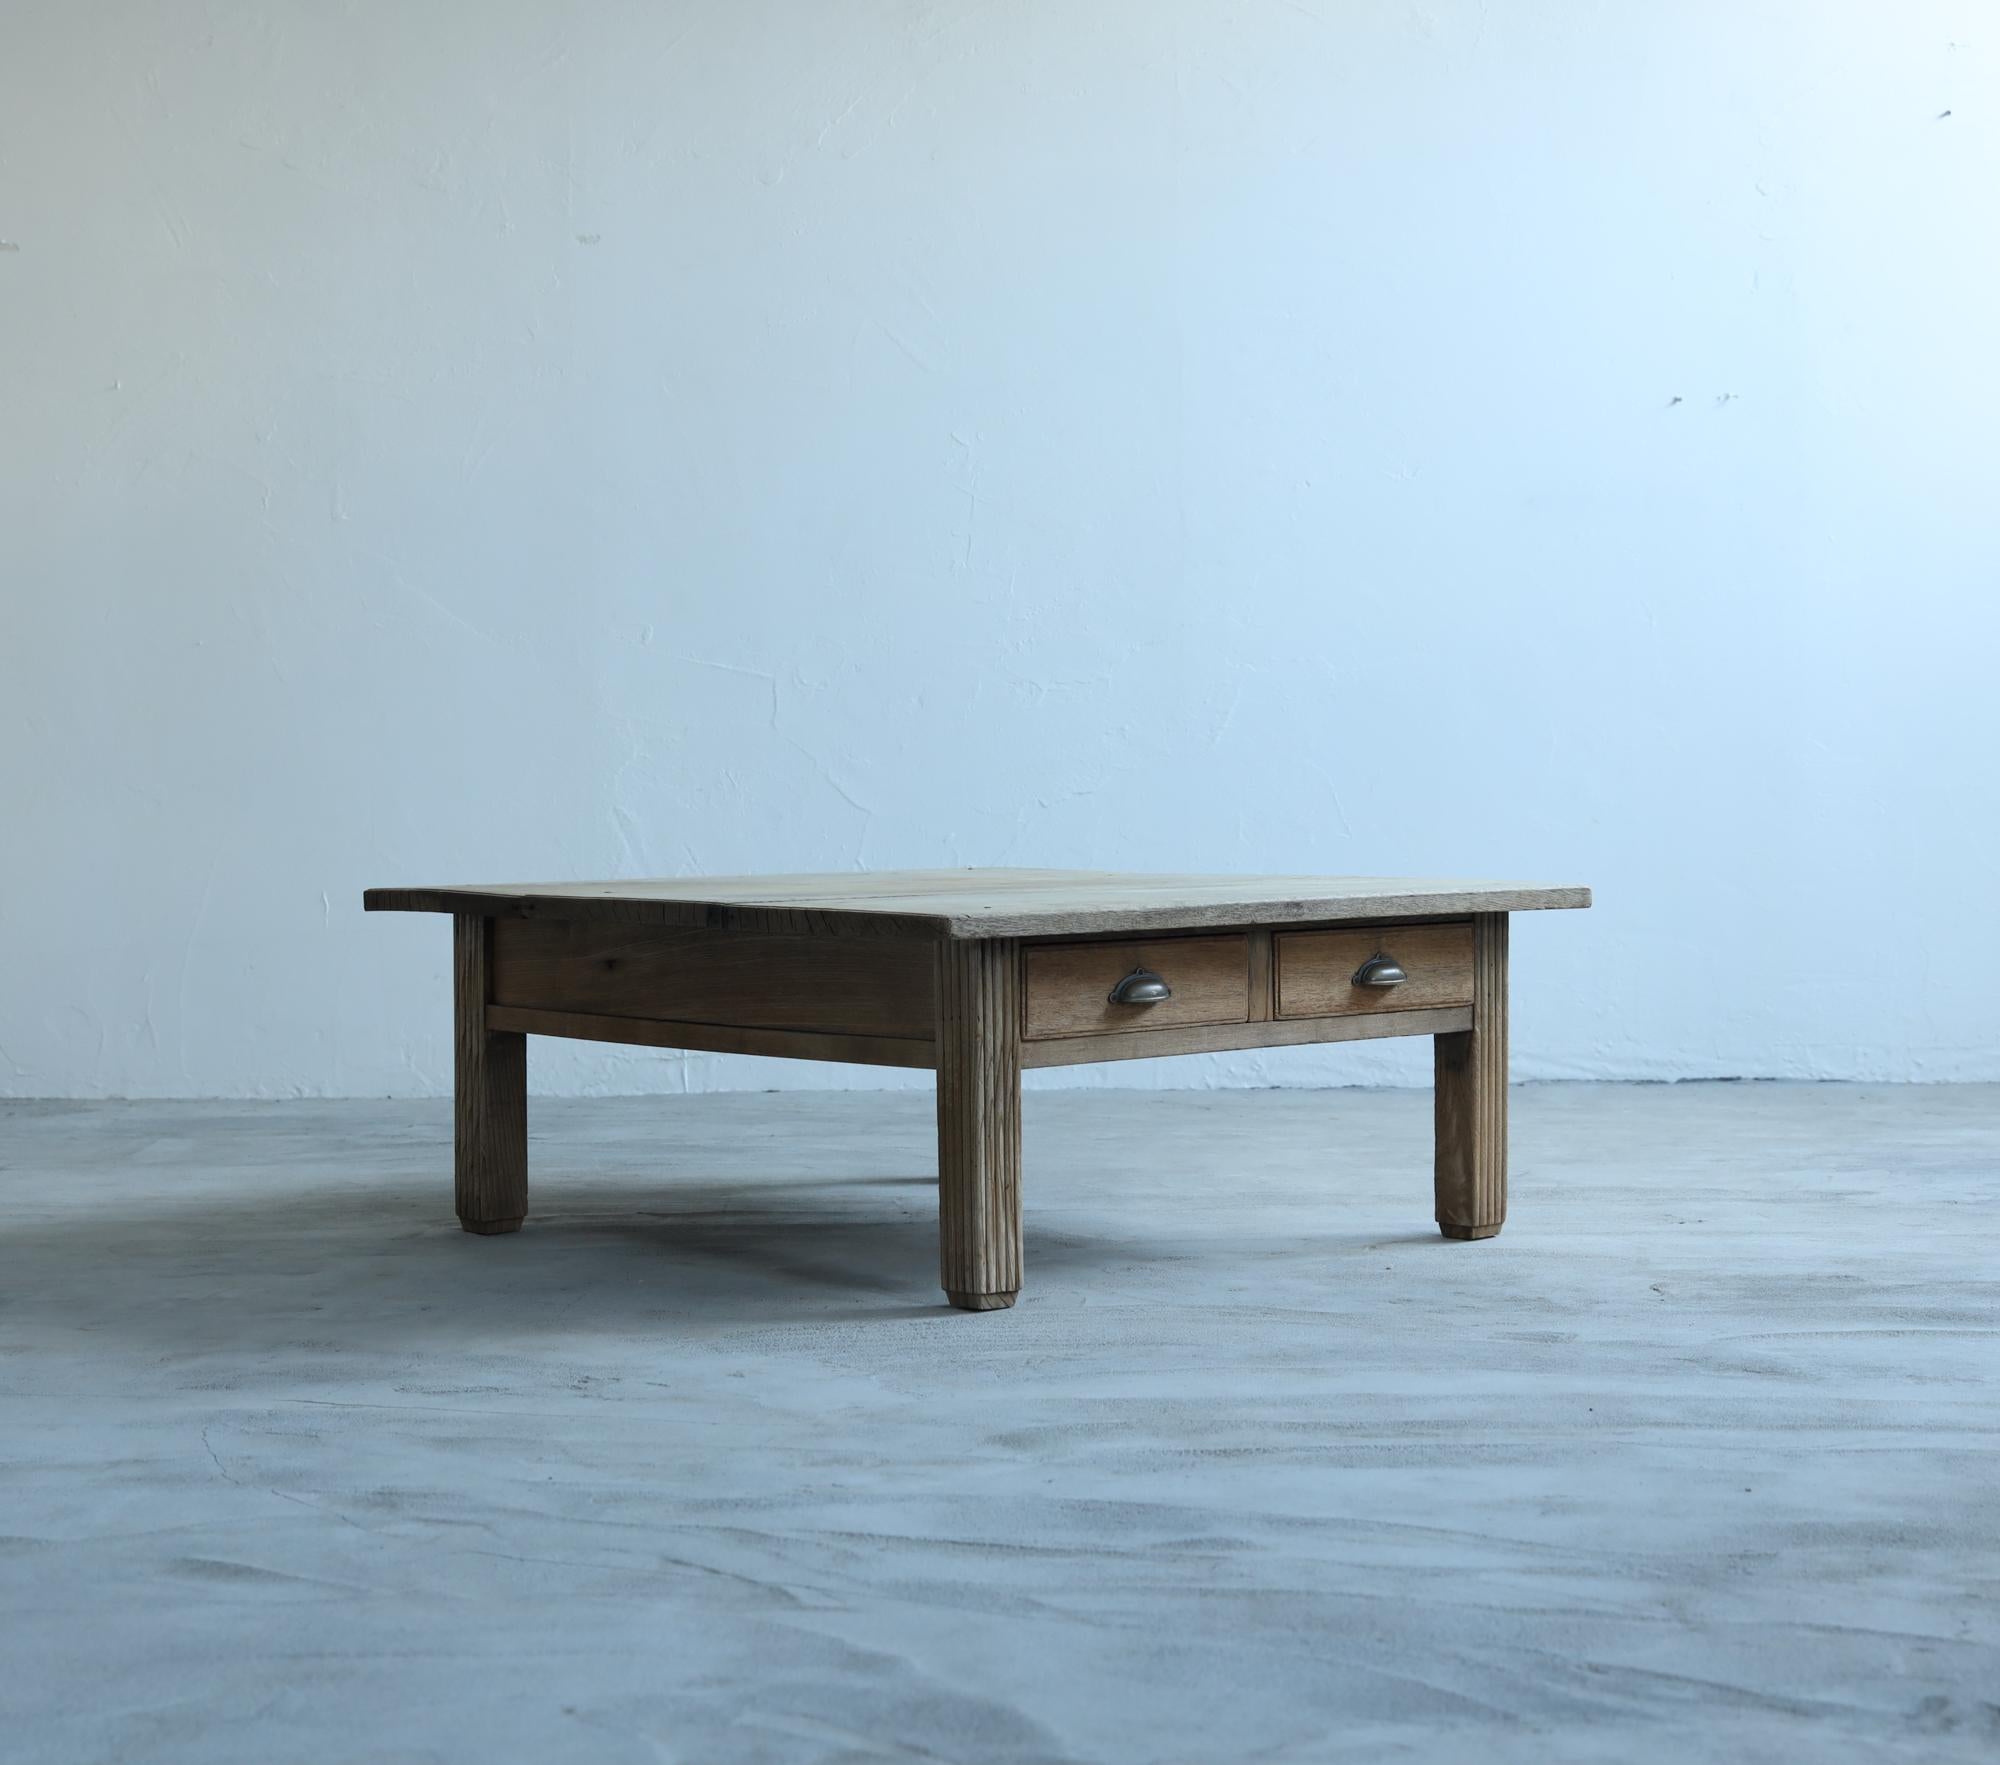 This is a Japanese antique coffee table produced in the Taisho period.

This furniture was made by applying traditional techniques used in Japanese shrines.

The material is high-quality oak wood. The grain of the wood is very beautiful.

The unique